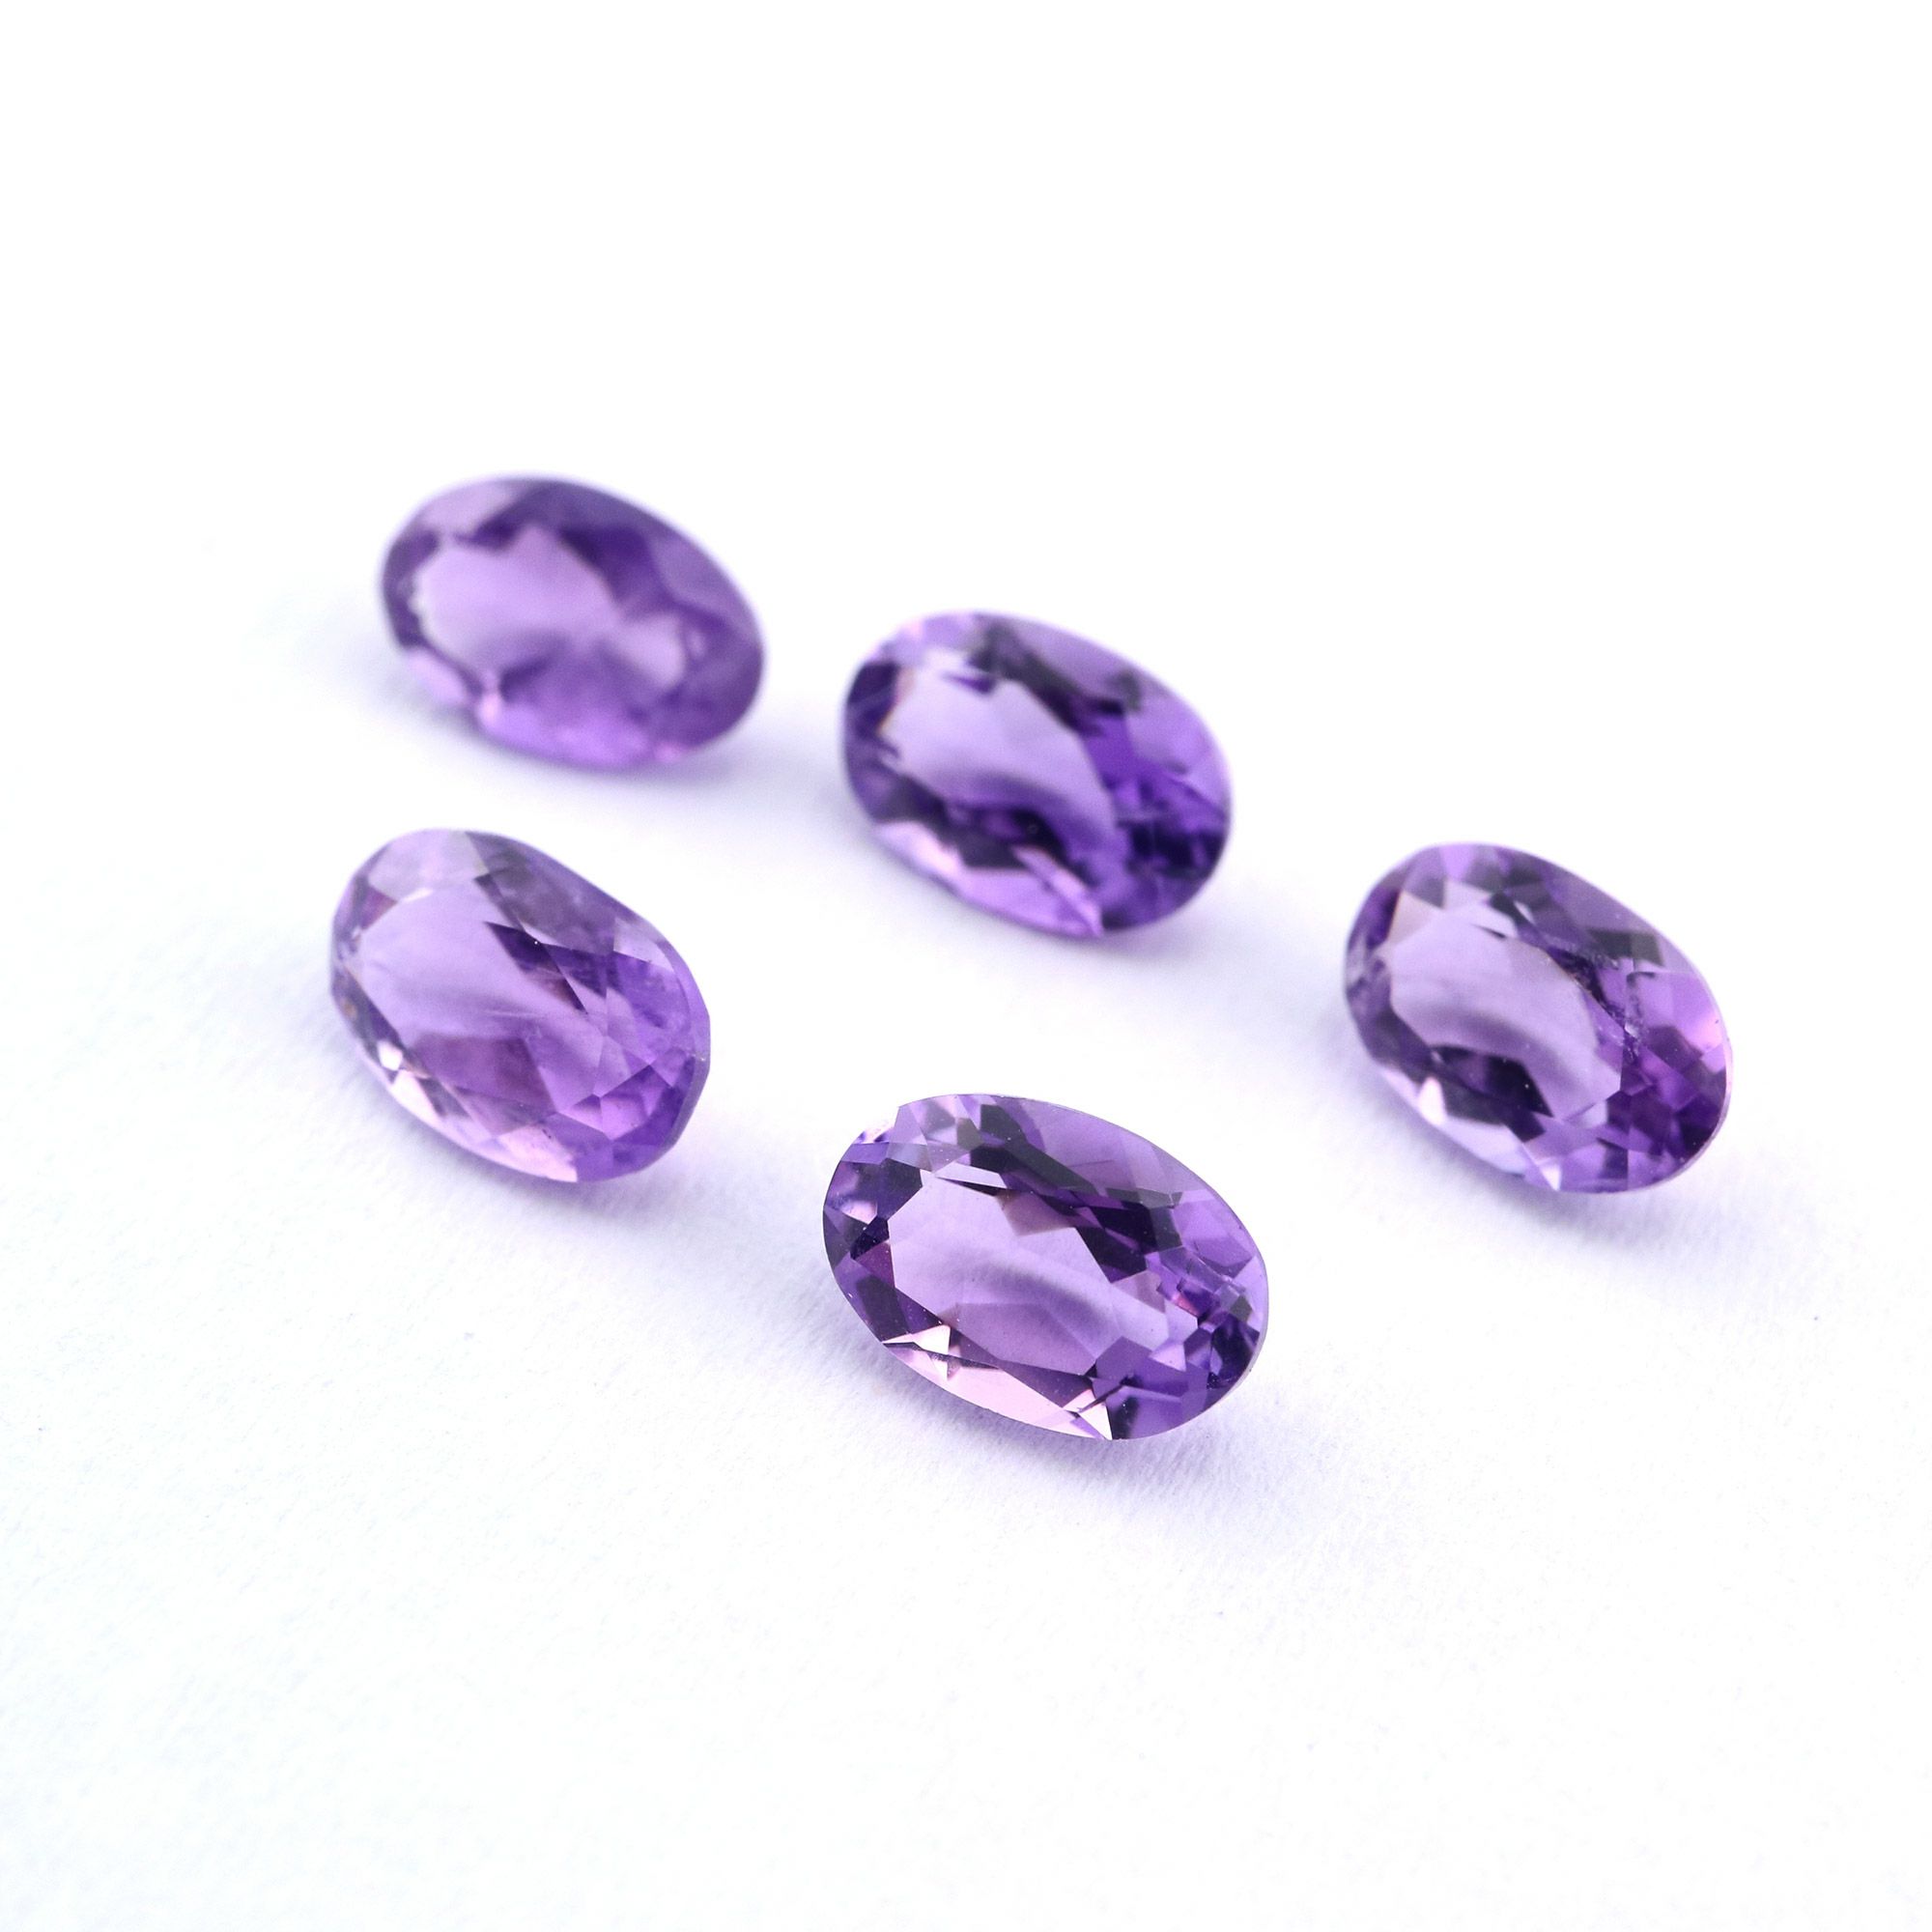 1Pcs Oval Purple Amethyst February Birthstone Faceted Cut Loose Gemstone Natural Semi Precious Stone DIY Jewelry Supplies 4120123 - Click Image to Close